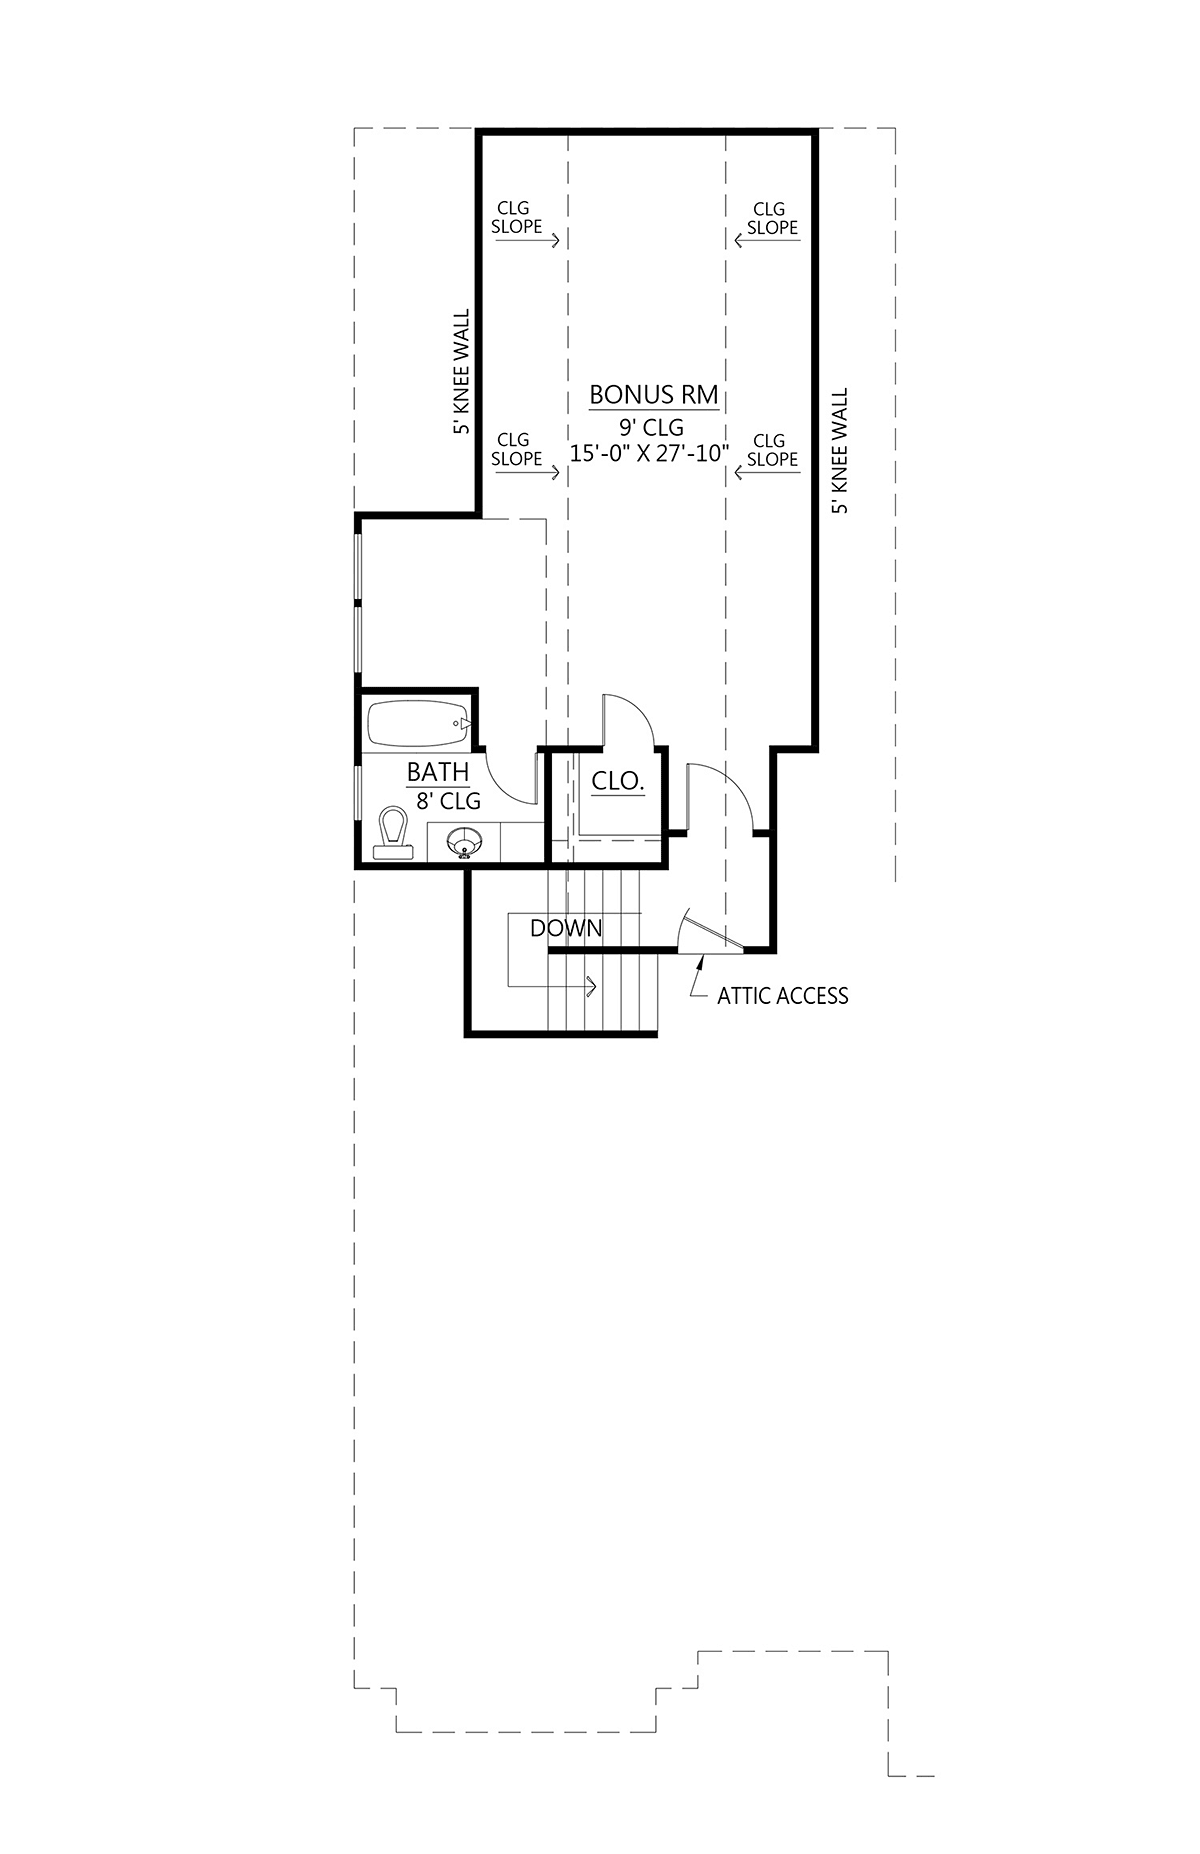 4 Bedroom House Plans